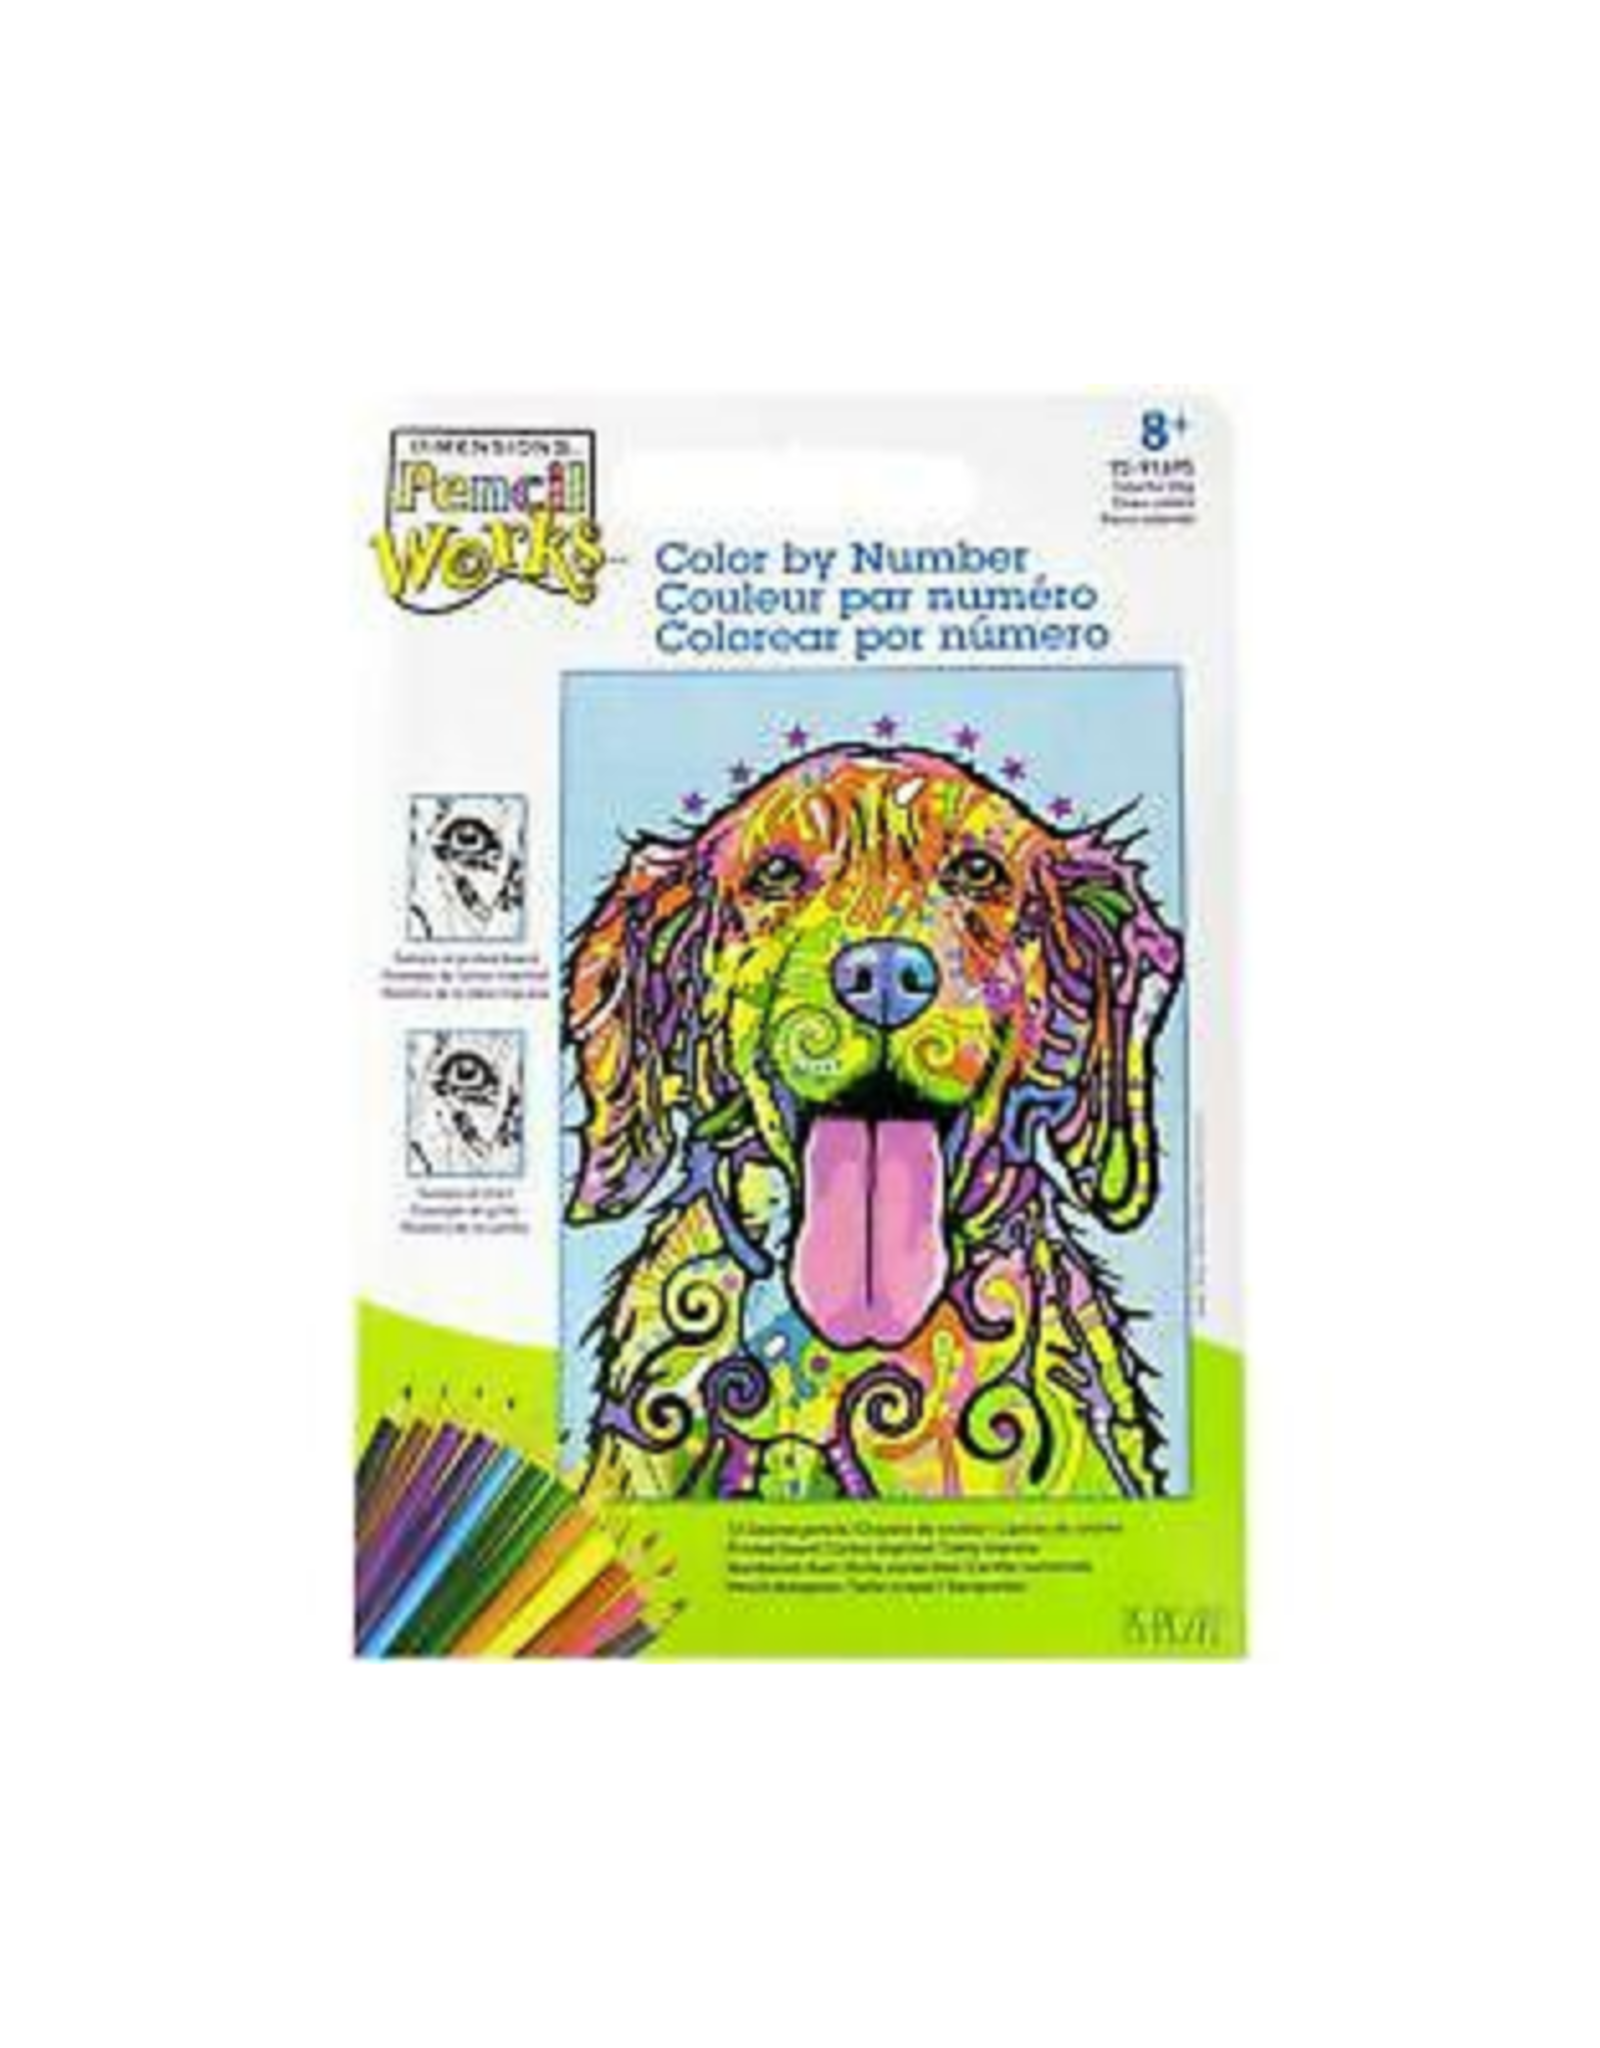 Dimensions Colorful Dog - Pencil by Number